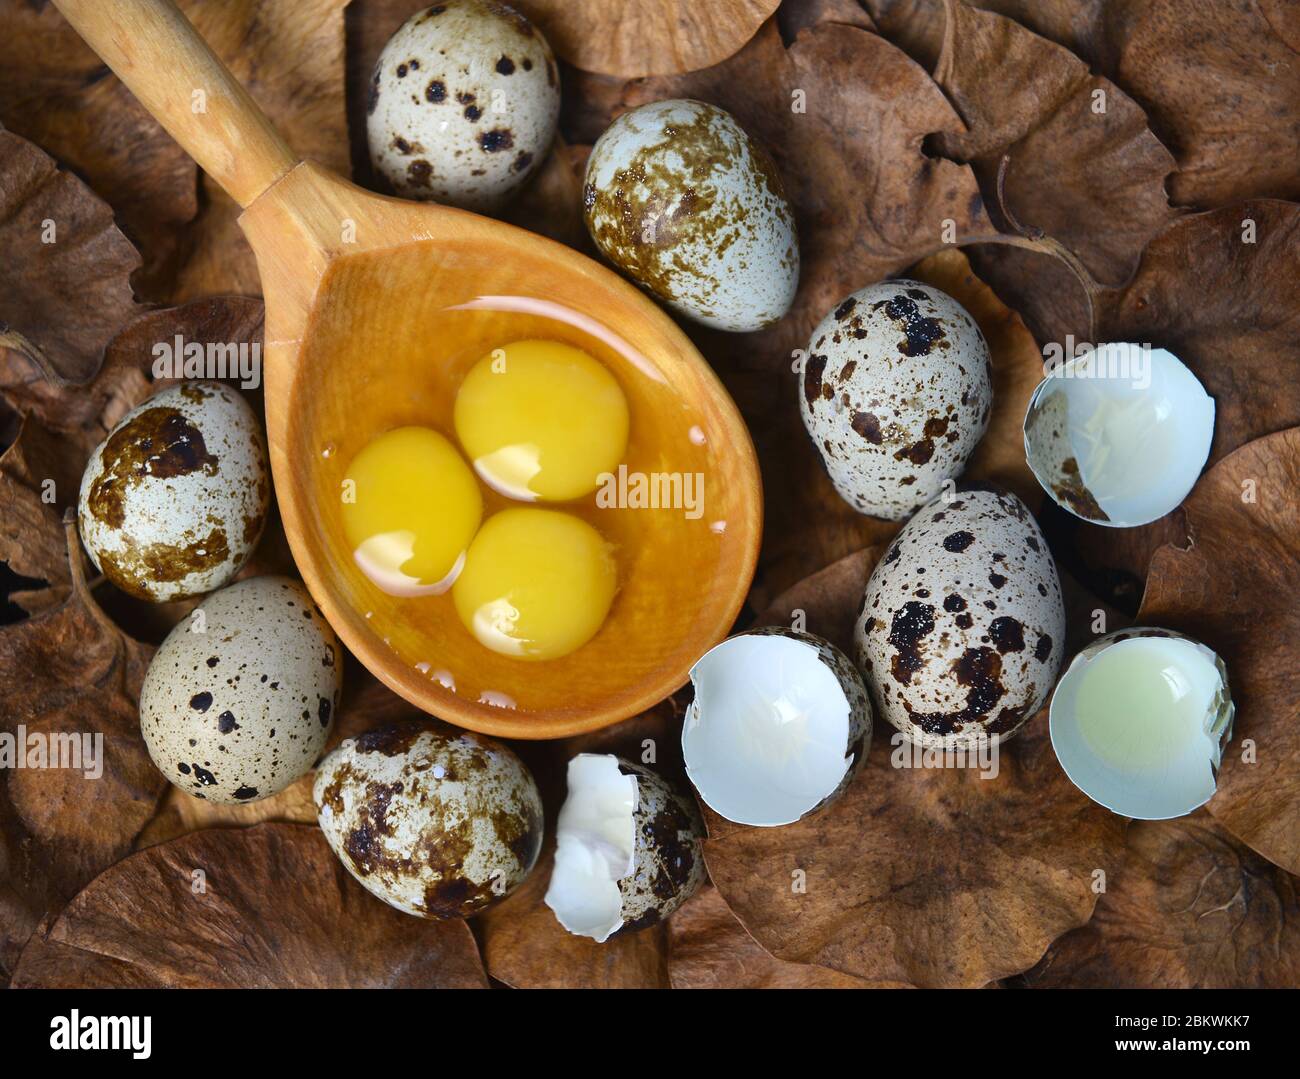 Quail eggs easter. Quail eggs and yolk in on a background of a wooden surface, selective focus. Top view. EASTER. Quail egg Stock Photo